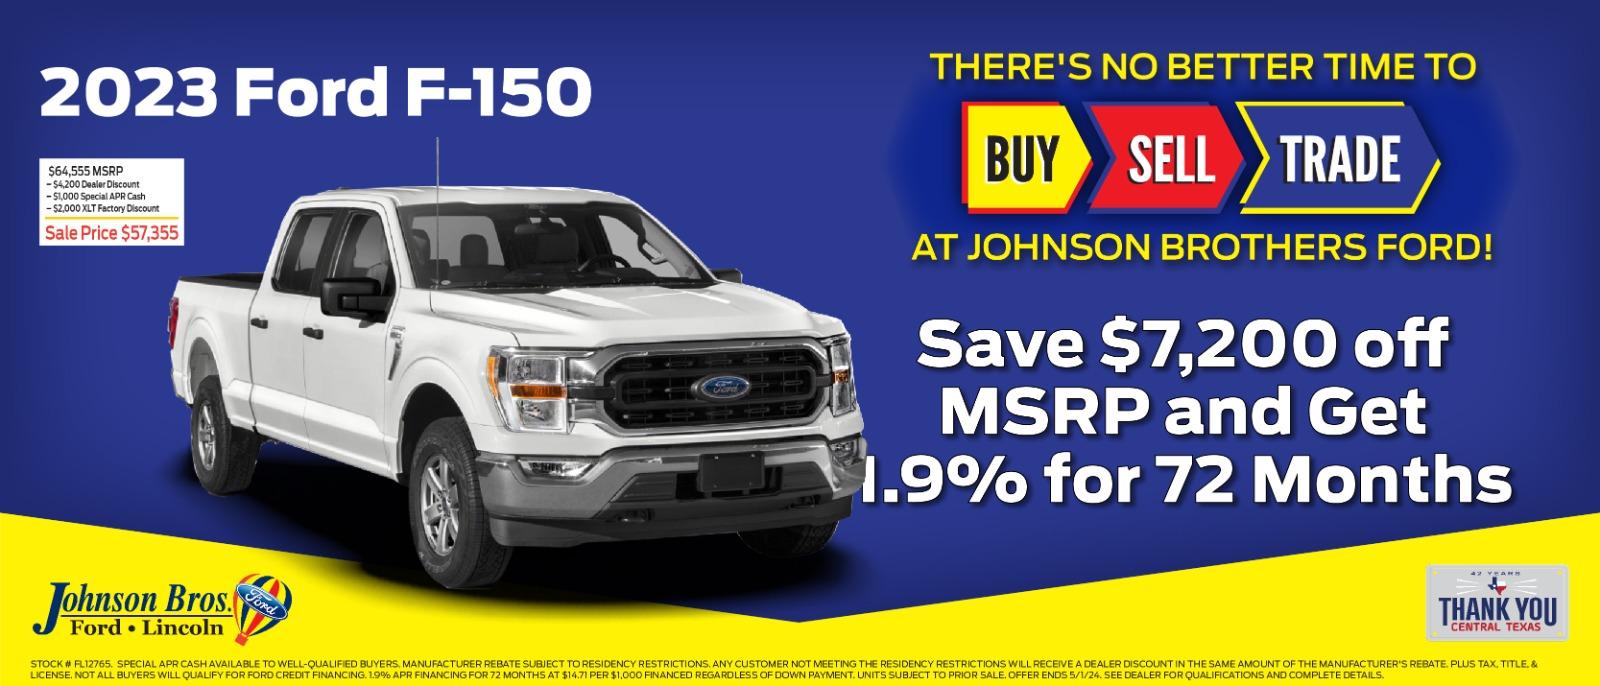 2023 Ford F-150 

Save $7,200 off MSRP and Get 1.9% for 72 months